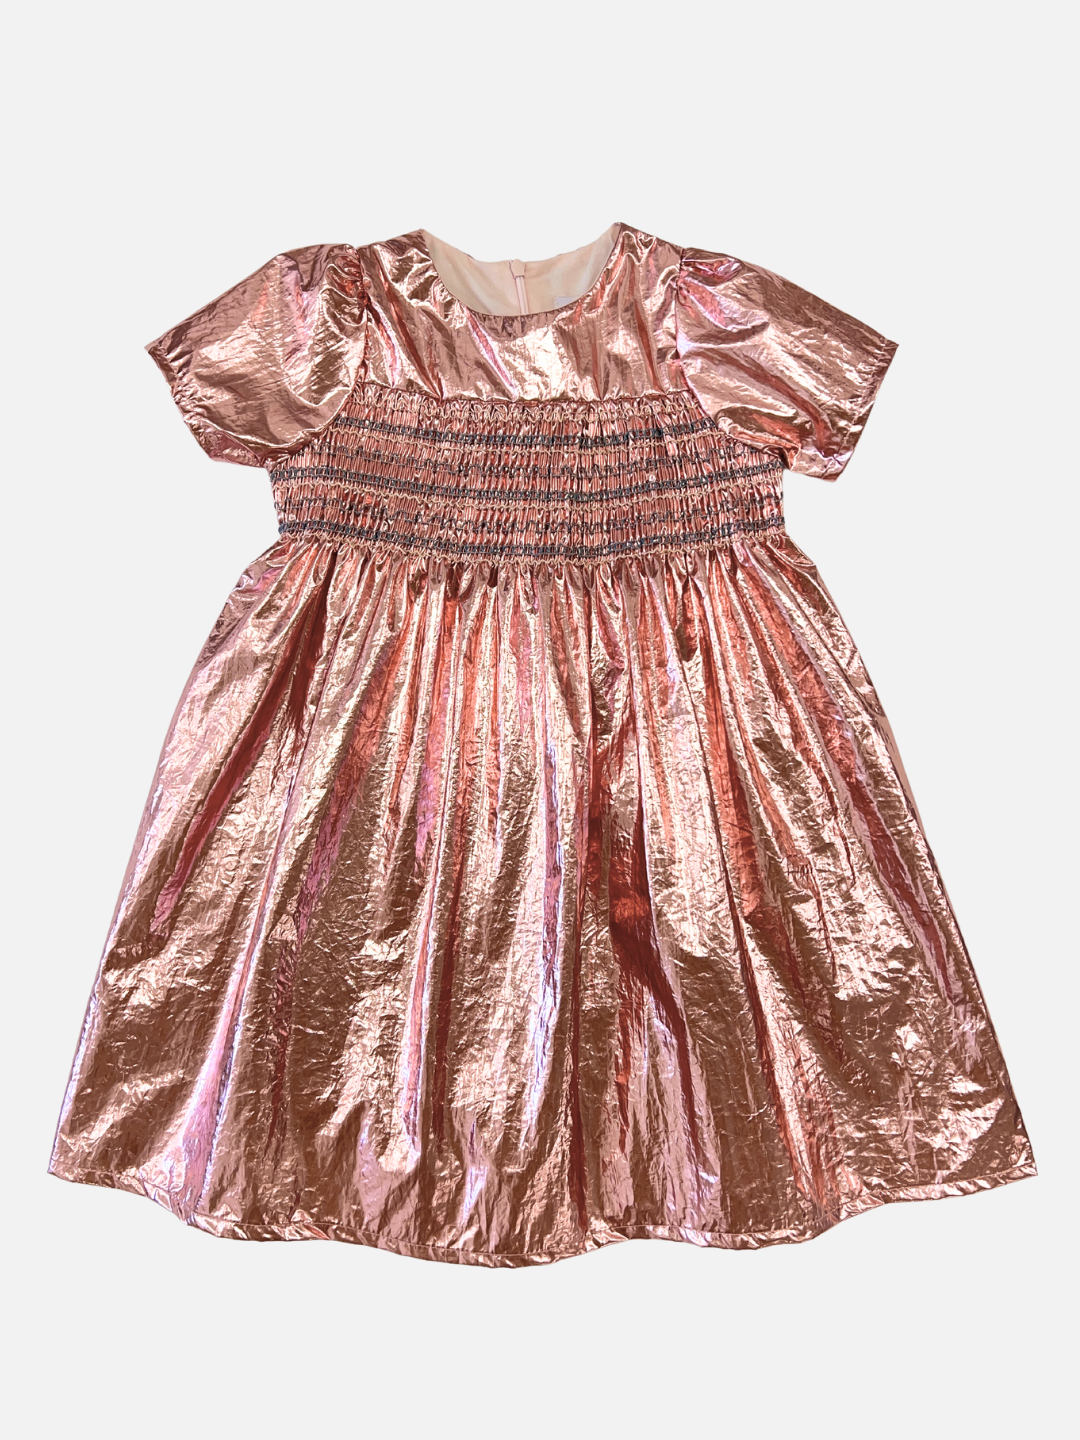 Kids party dress in pink metallic fabric with a round neck, short sleeves, smocked bodice, empire waist and full skirt.